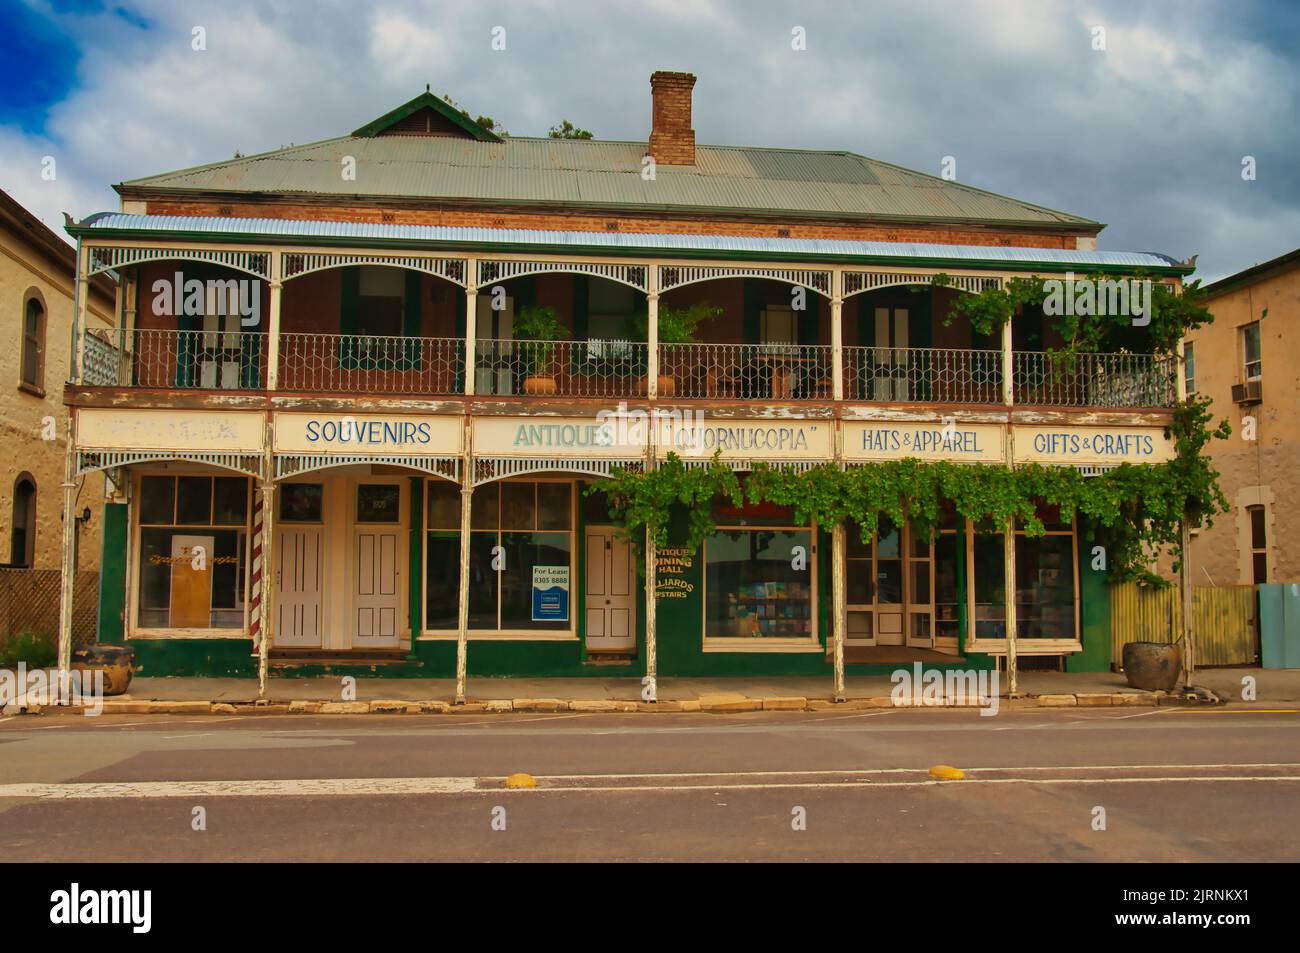 Typically Australian Victorian building with small shops and a roofed balcony on the second floor in the town of Quorn, South Australia Stock Photo